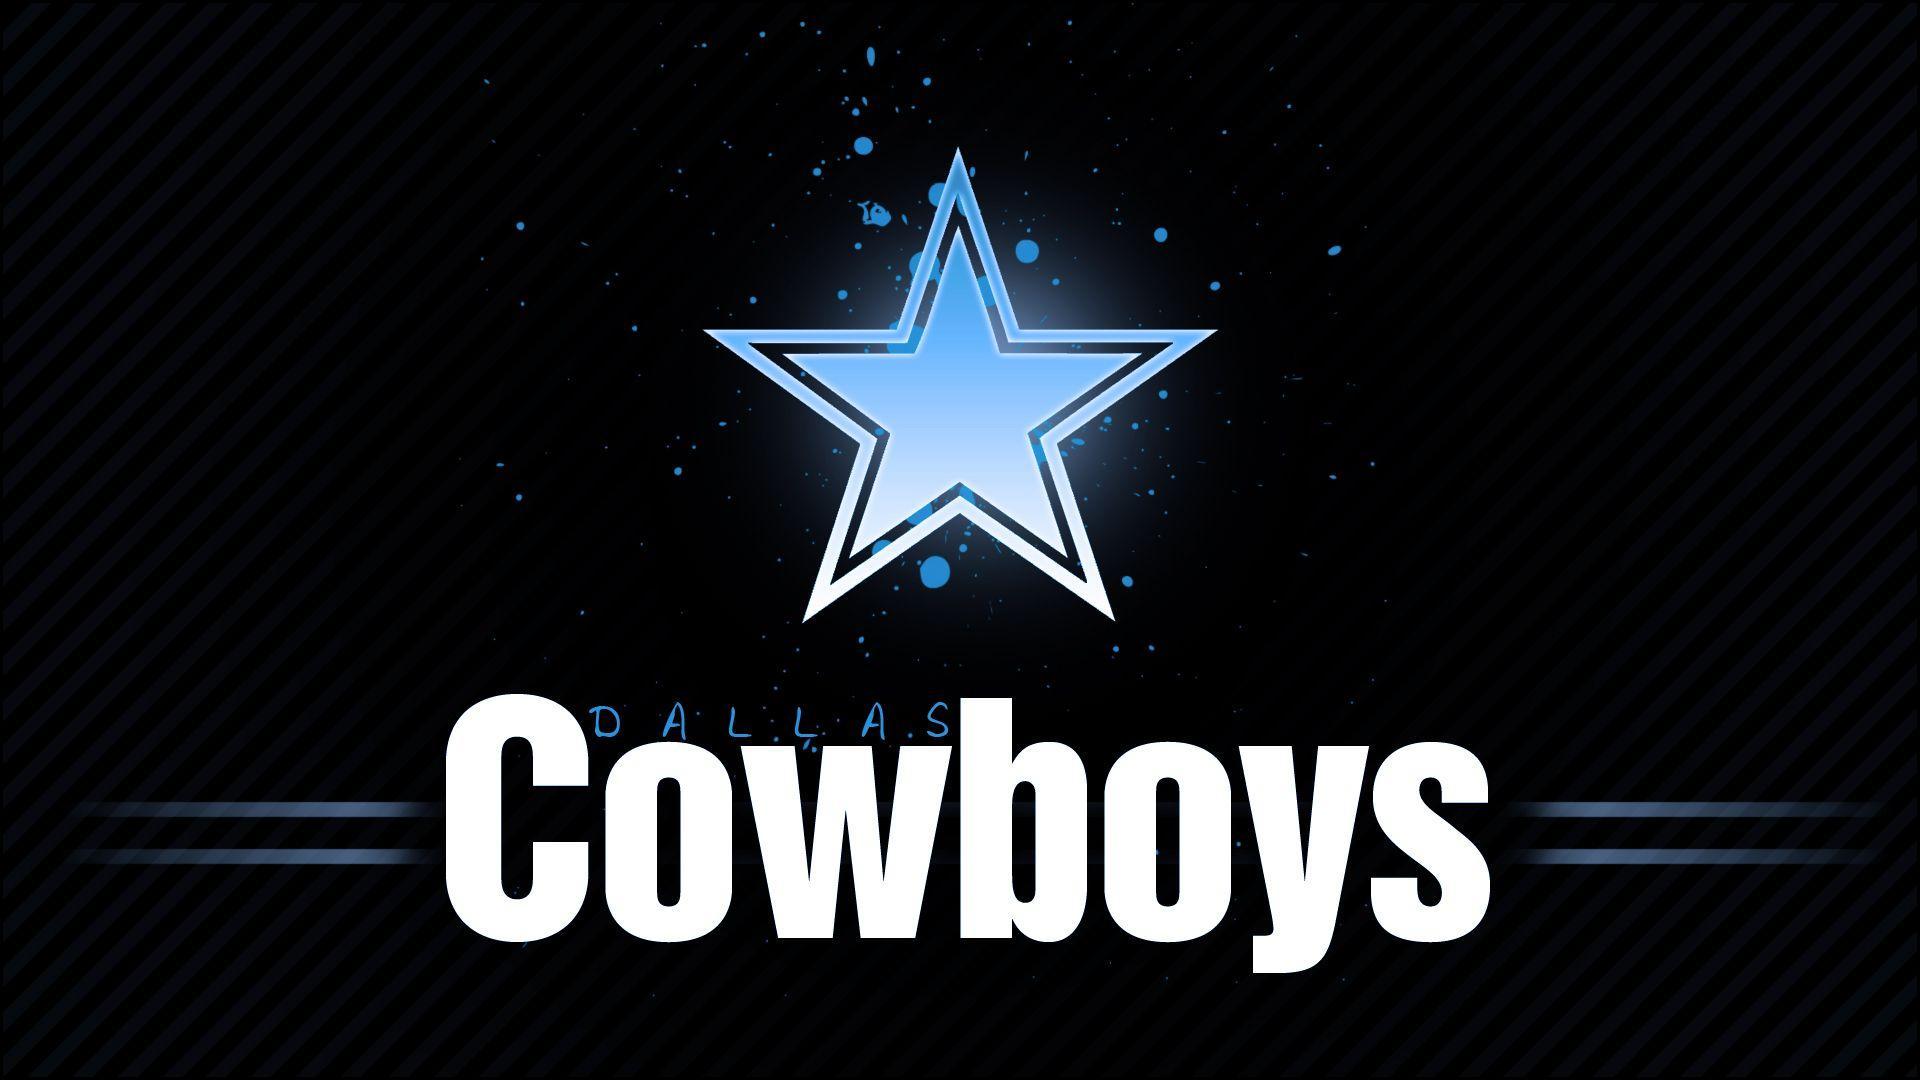 Dallas Cowboys Wallpapers, Pictures, Image